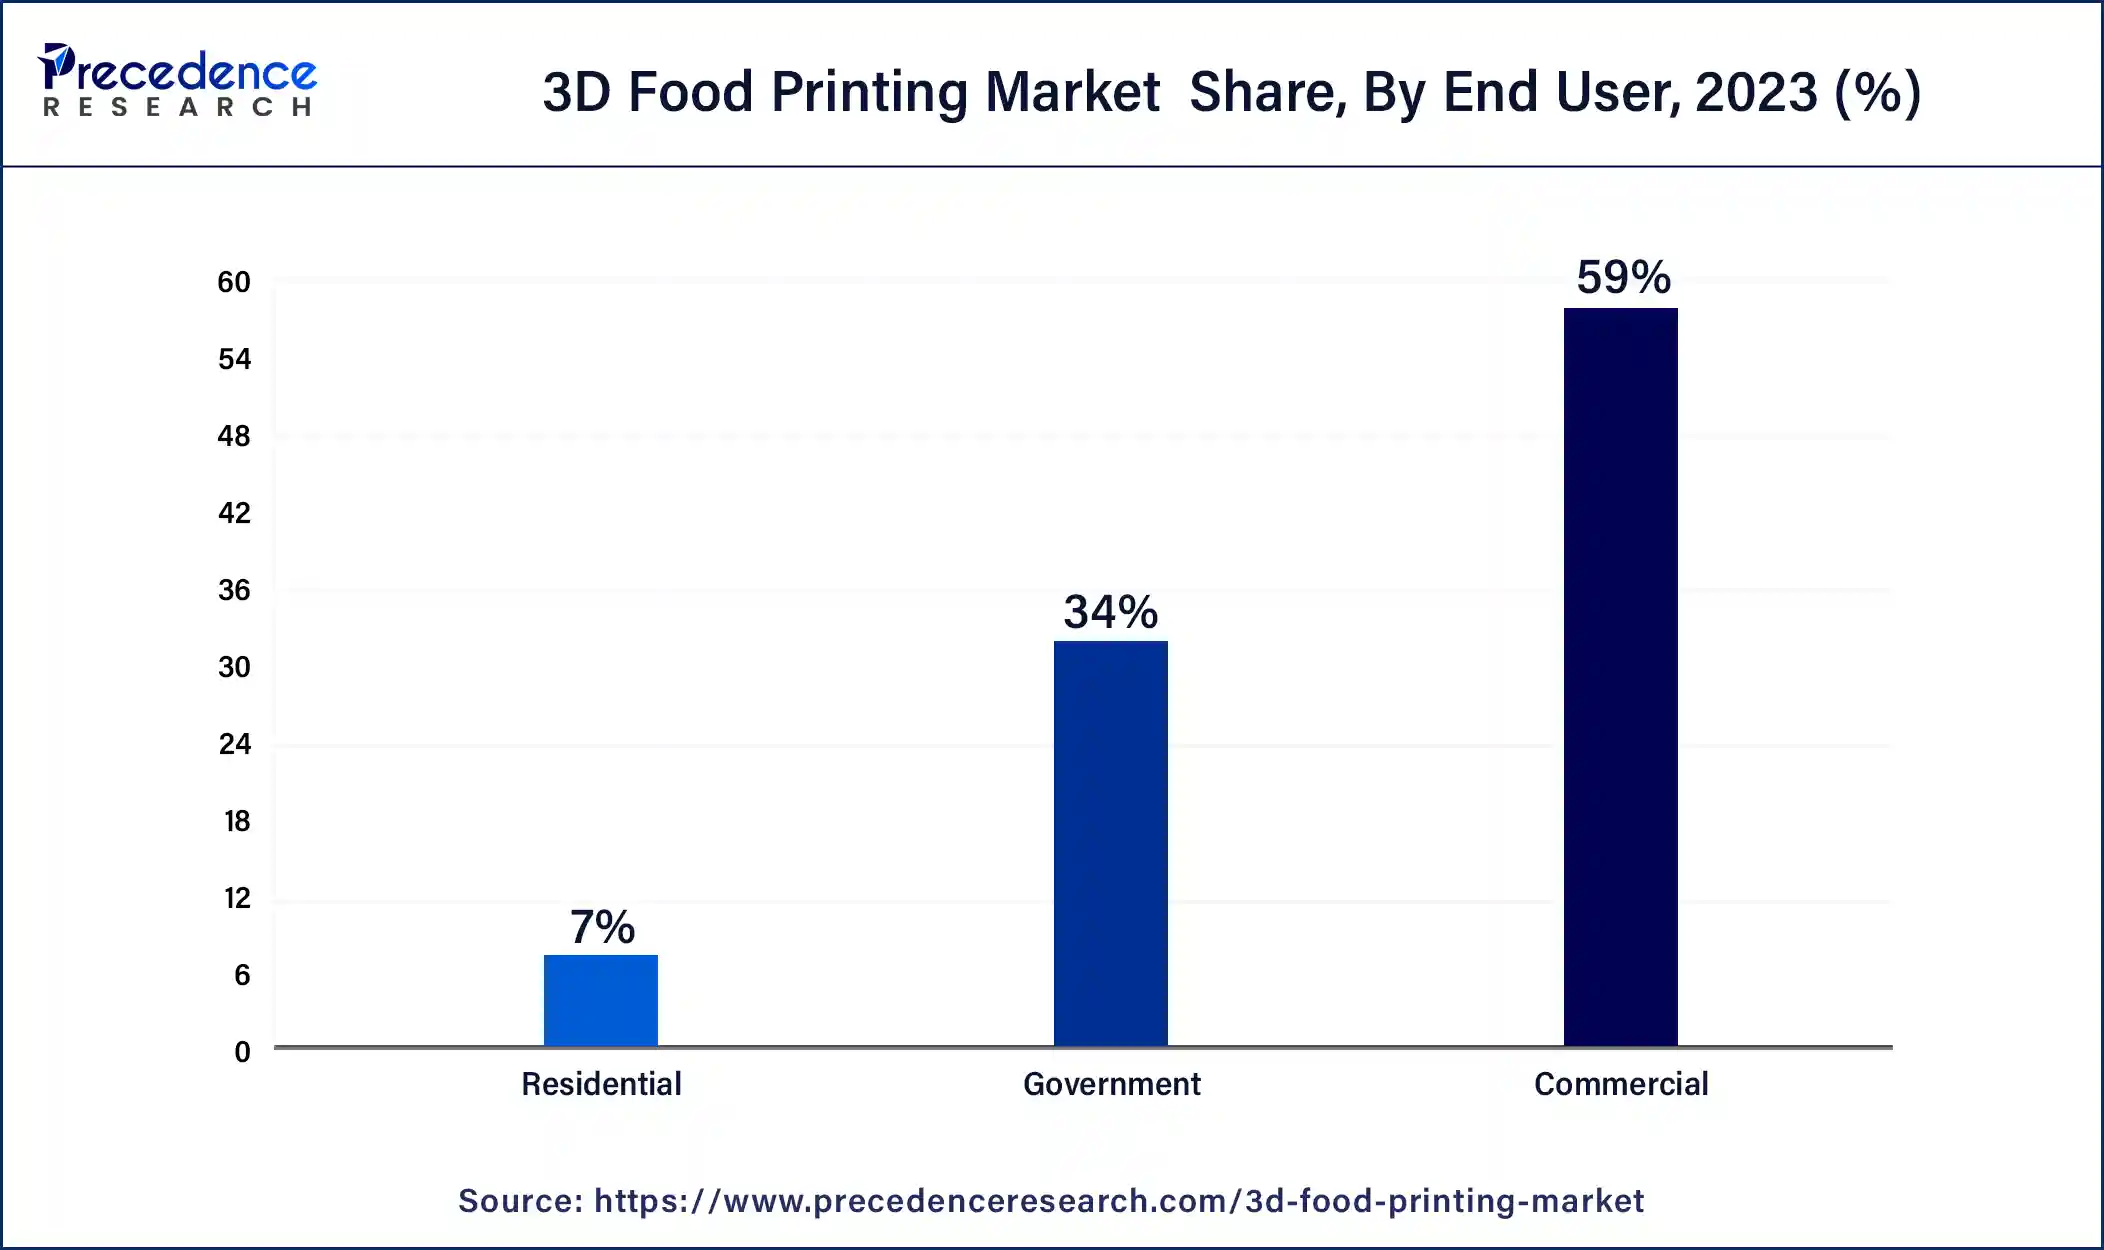 3D Food Printing Market Share, By End User, 2023 (%)